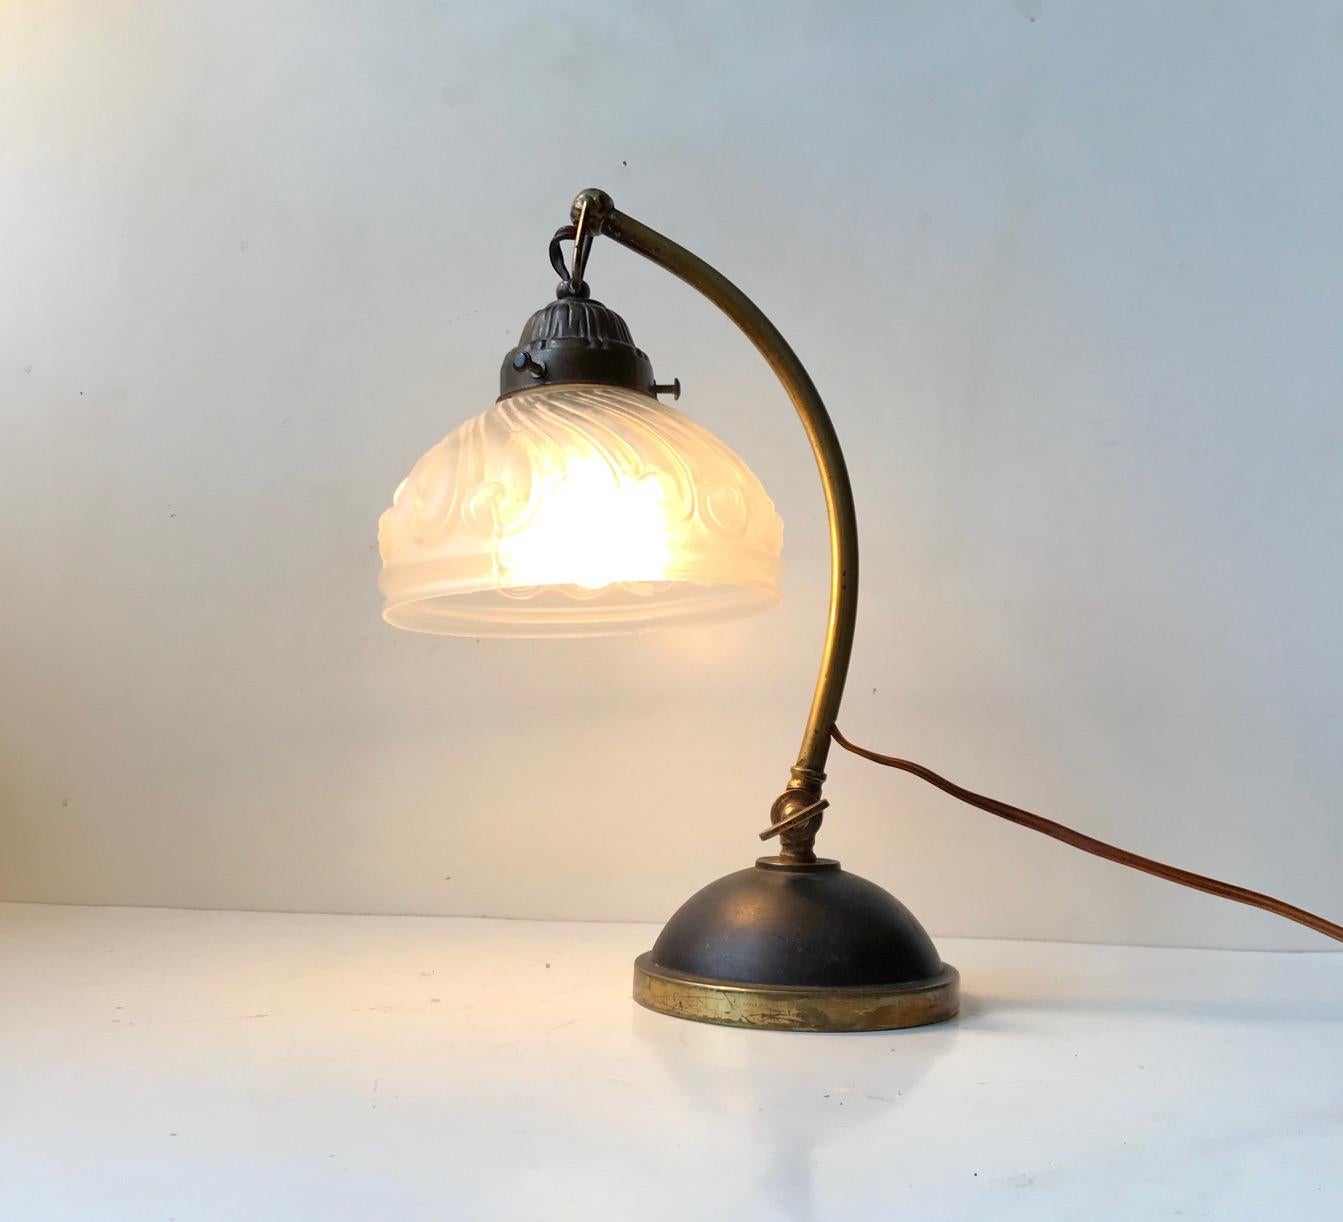 A stylish table lamp manufactured in Italy circa 1930-40. It features a swag loose hanging molded glass shade with waves, a partially patinated solid brass base and a mechanism for a adjusting the angle of the stem. Measurements: H: 30 cm, Diameter: